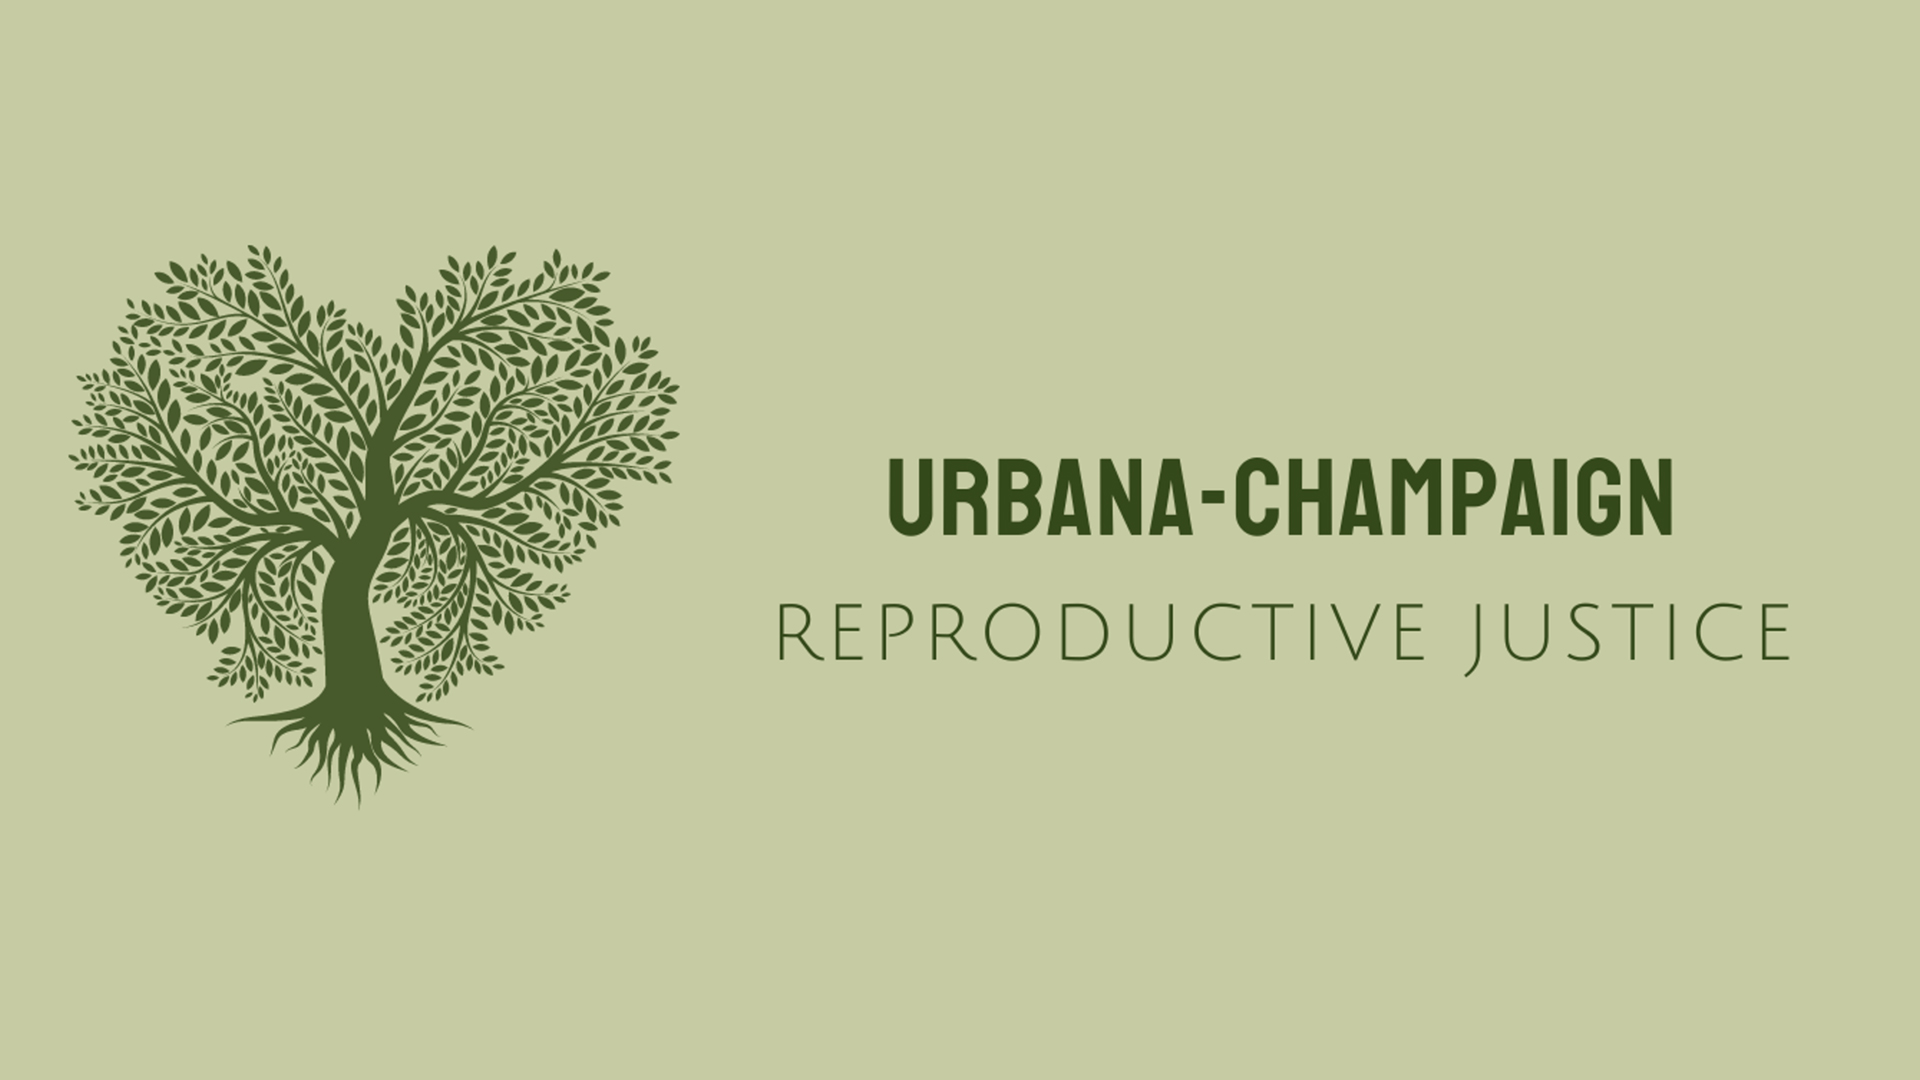 Urbana-Champaign Reproductive Justice in green front on a green background with an image of a tree and its leaves shaped as a heart